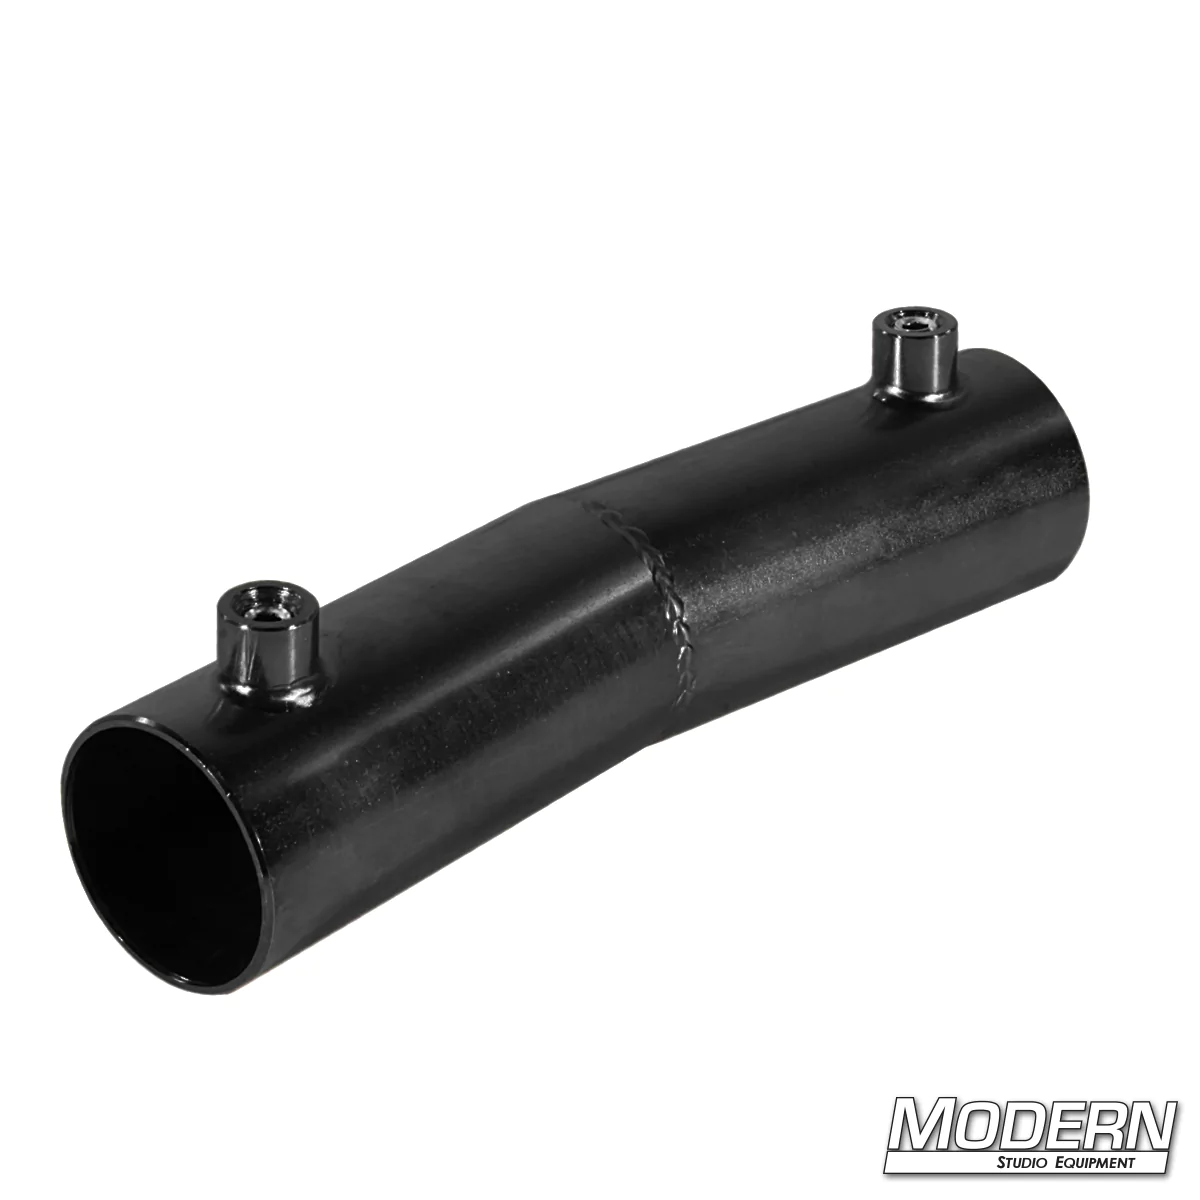 15° Sleeve for 1-1/4-inch - Black Zinc with Set Screws